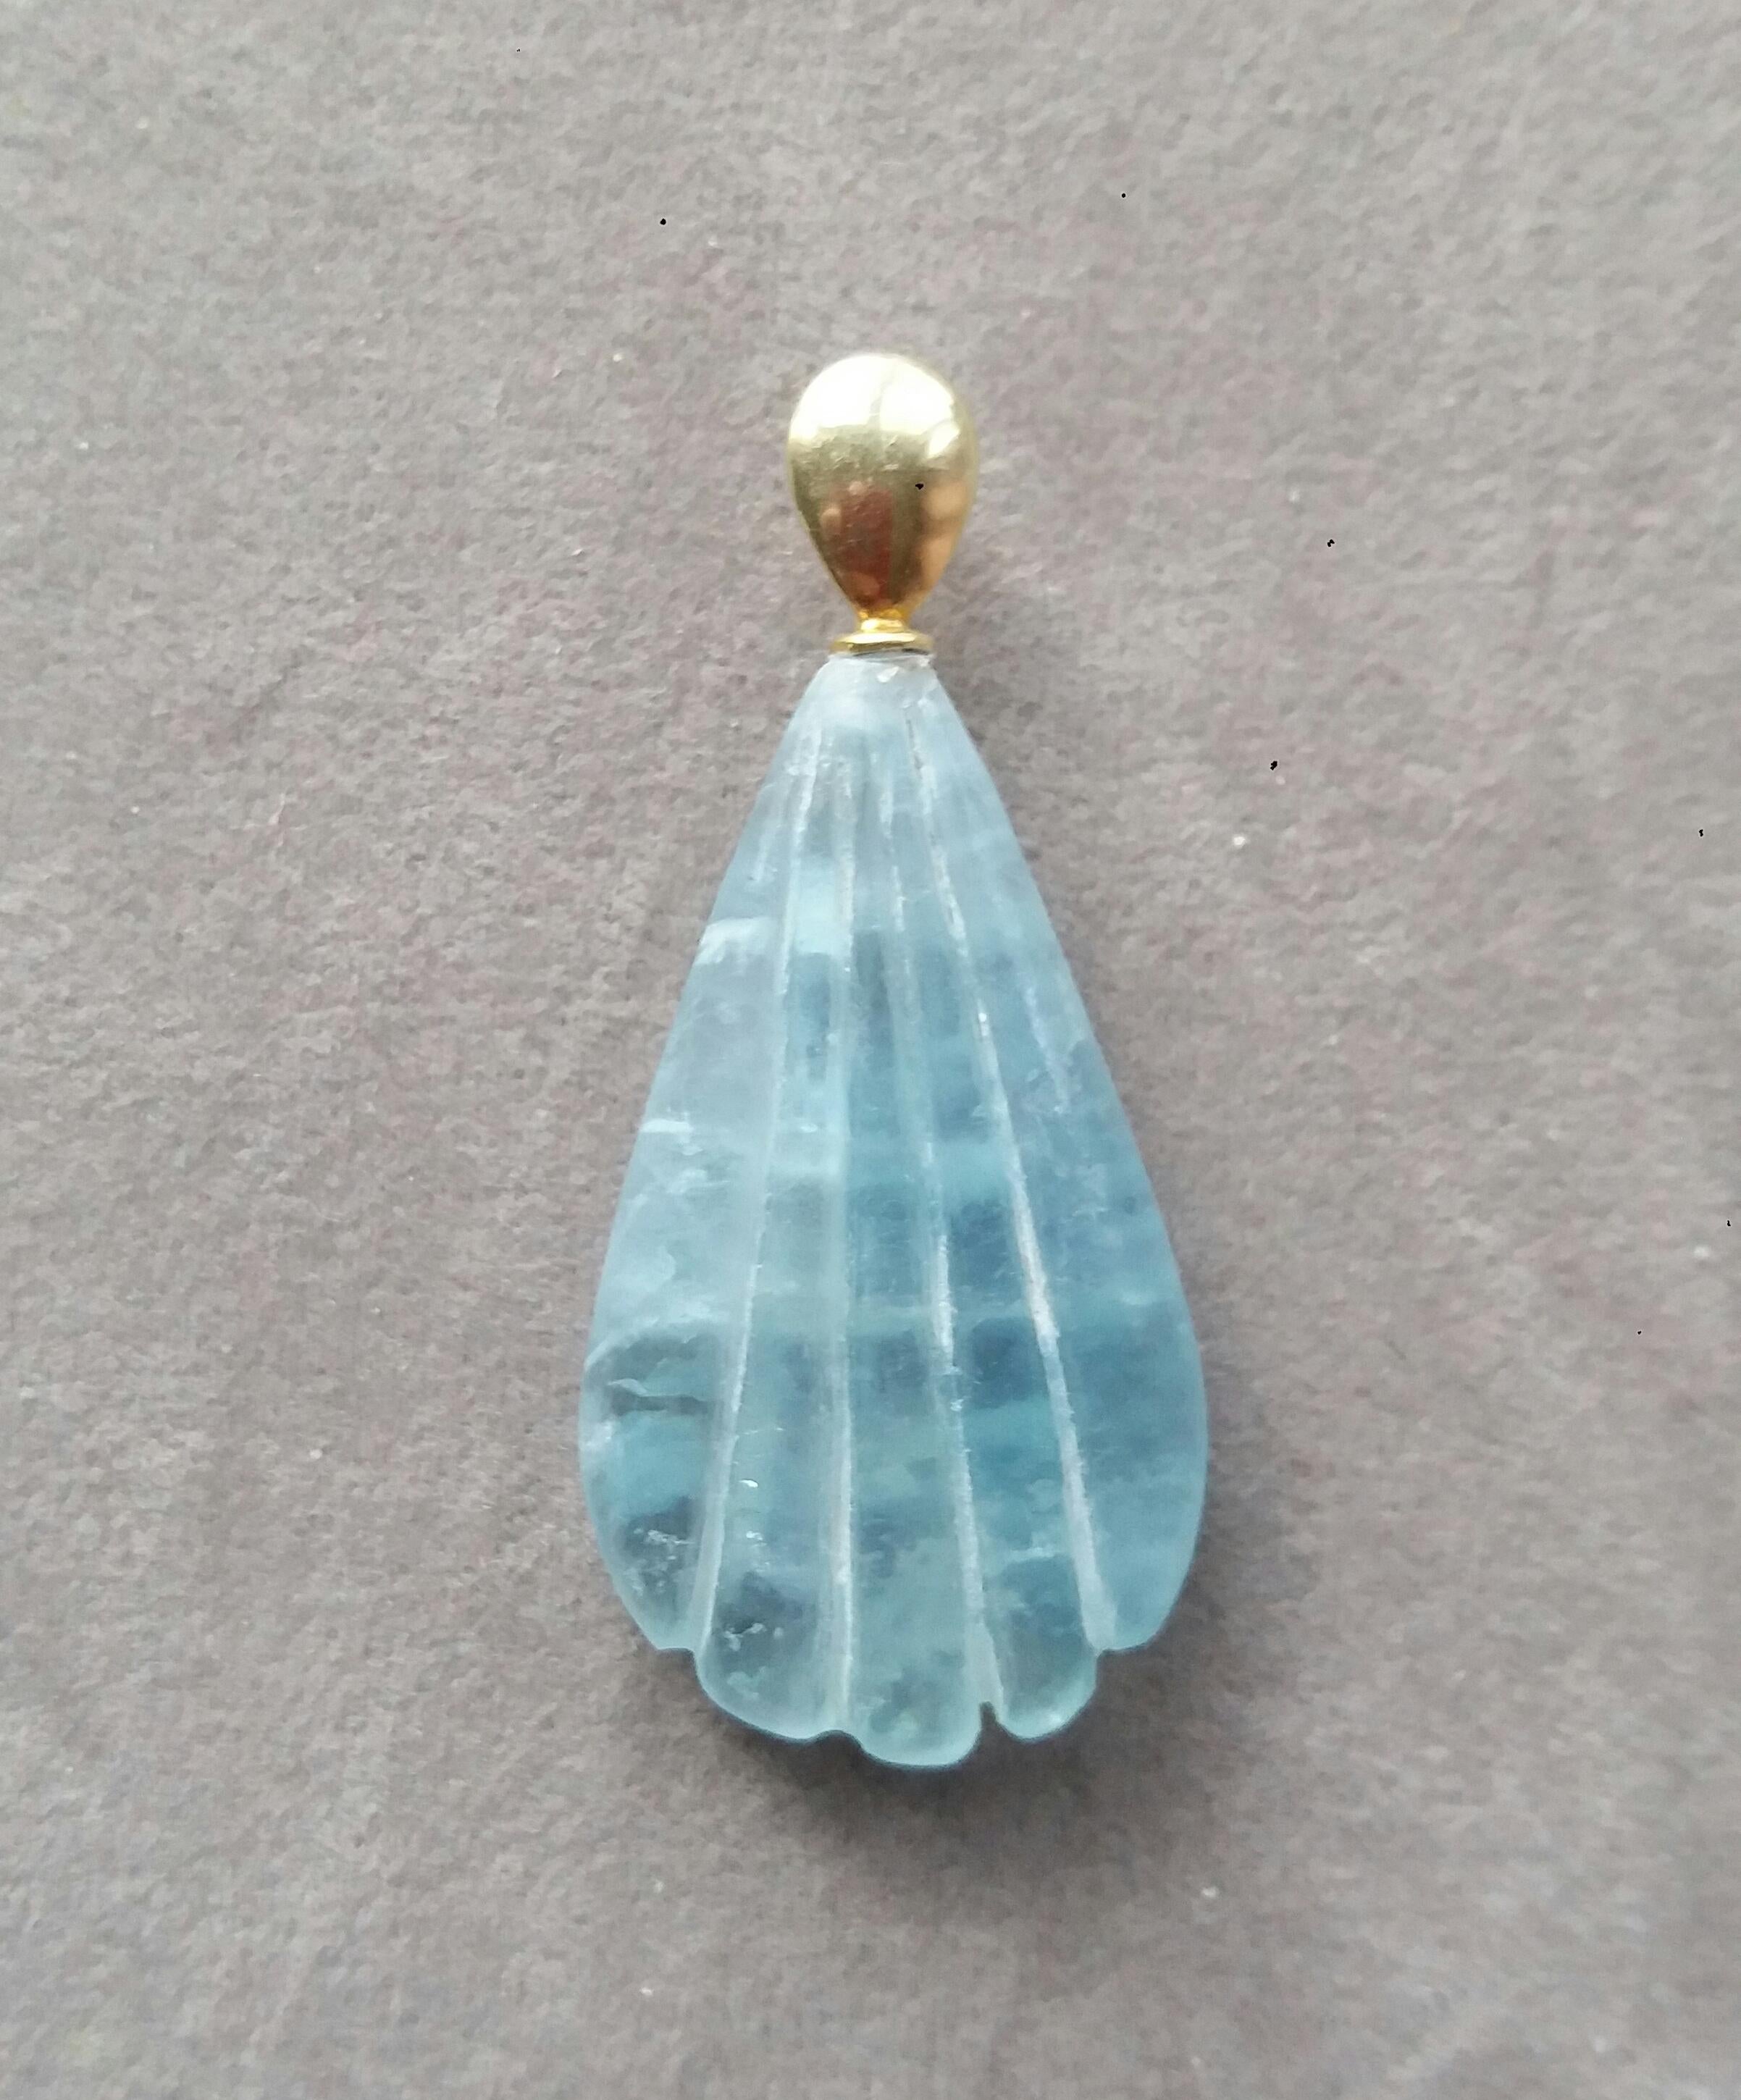 Simple chic Engraved Pear Shape Natural Aquamarine  pendant measuring 21 mm x37 mm set with solid 14 Kt. yellow gold bail (chain not included)

In 1978 our workshop started in Italy to make simple-chic Art Deco style jewellery, completely handmade